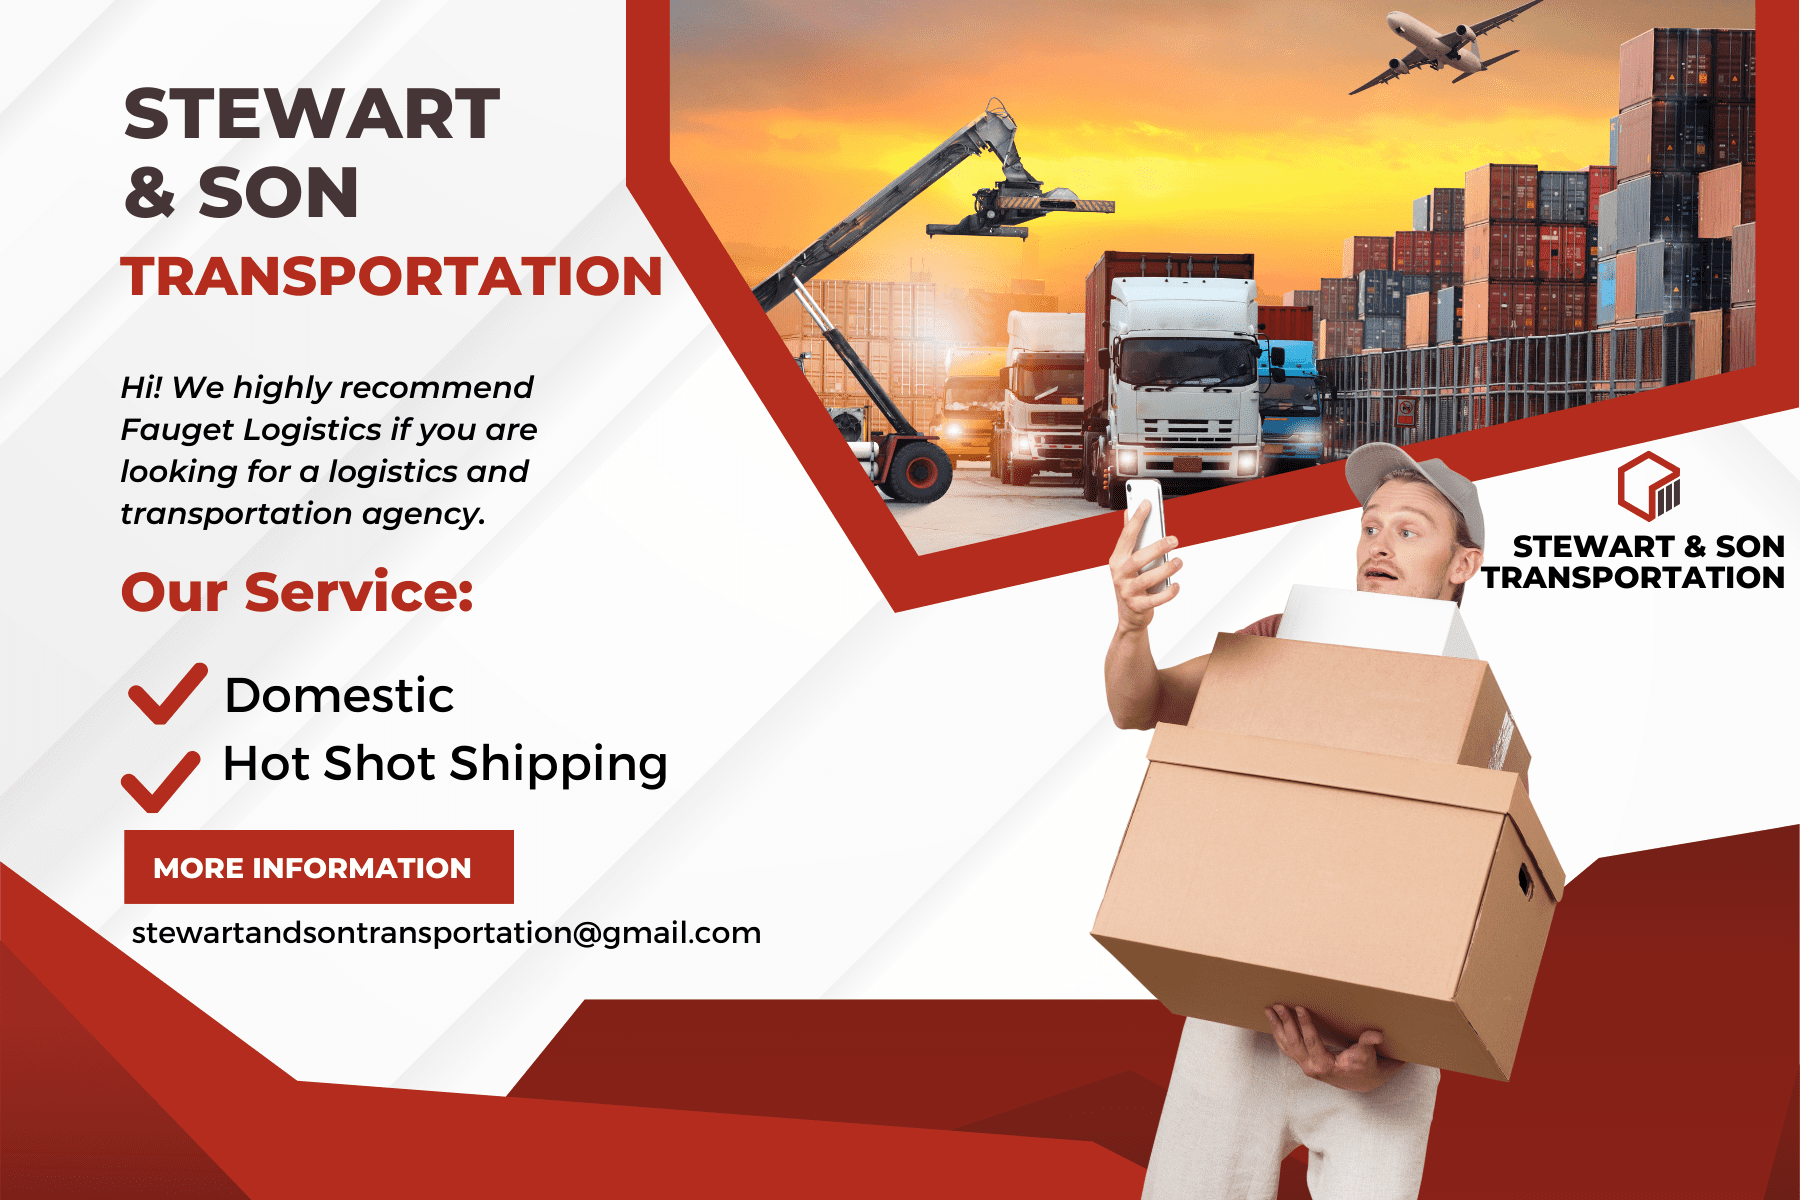 Featured image for “Stewart & Sons Transportation”